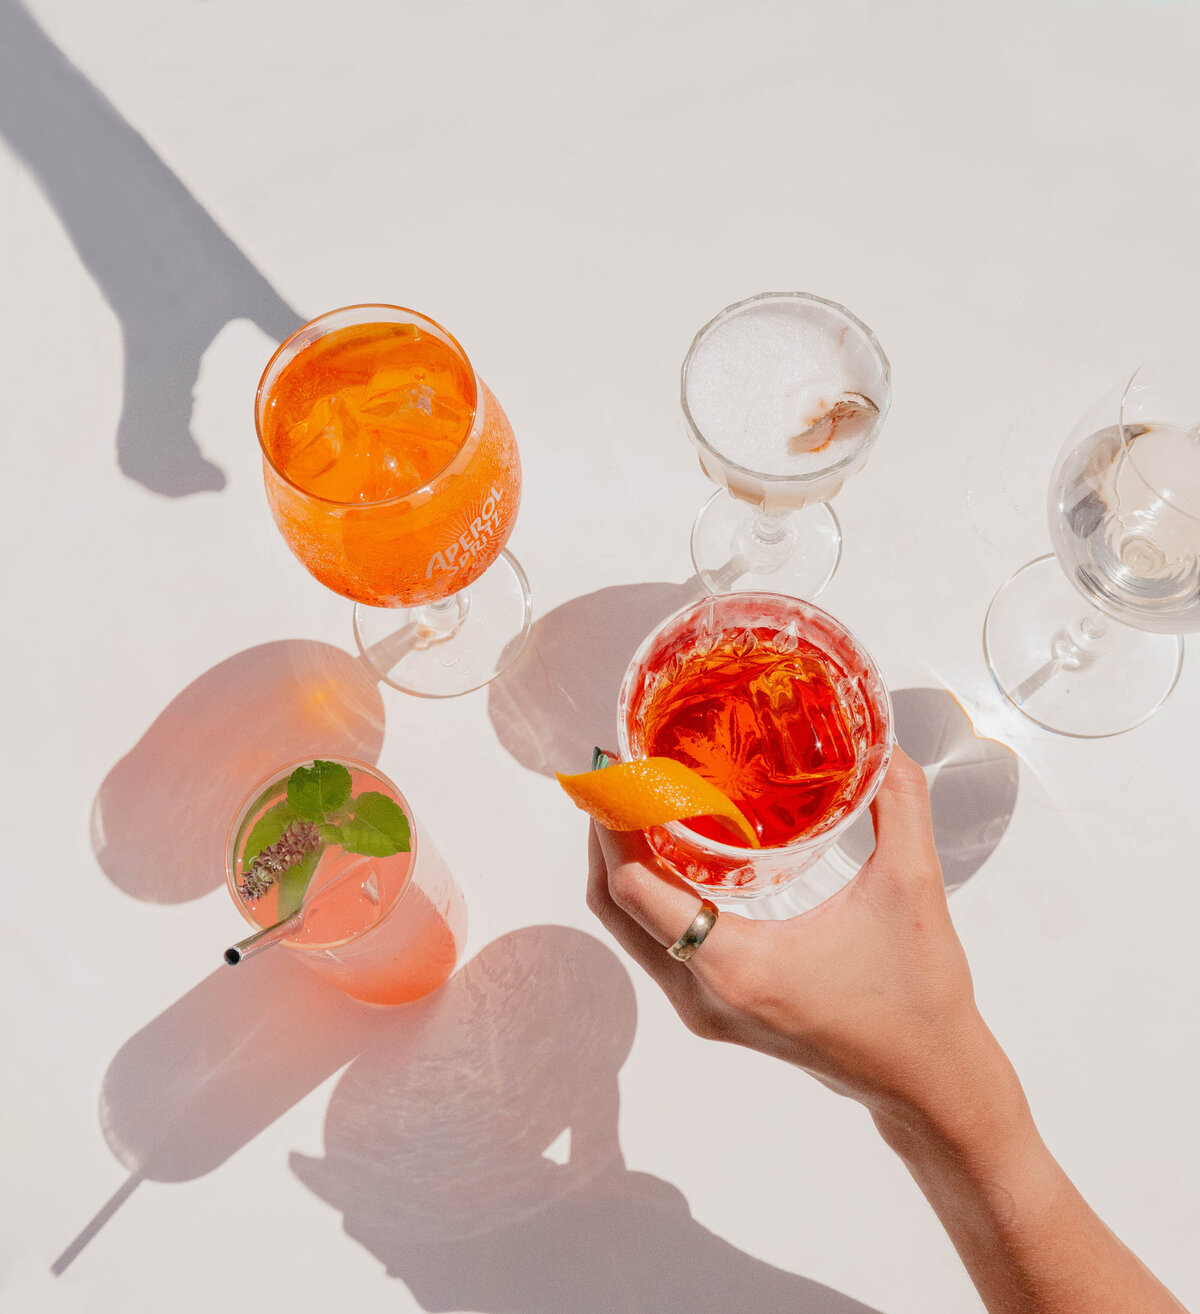 Negroni, aperol spritz and happy hour photography for Isolina Restaurante by Hopeful Outsiders